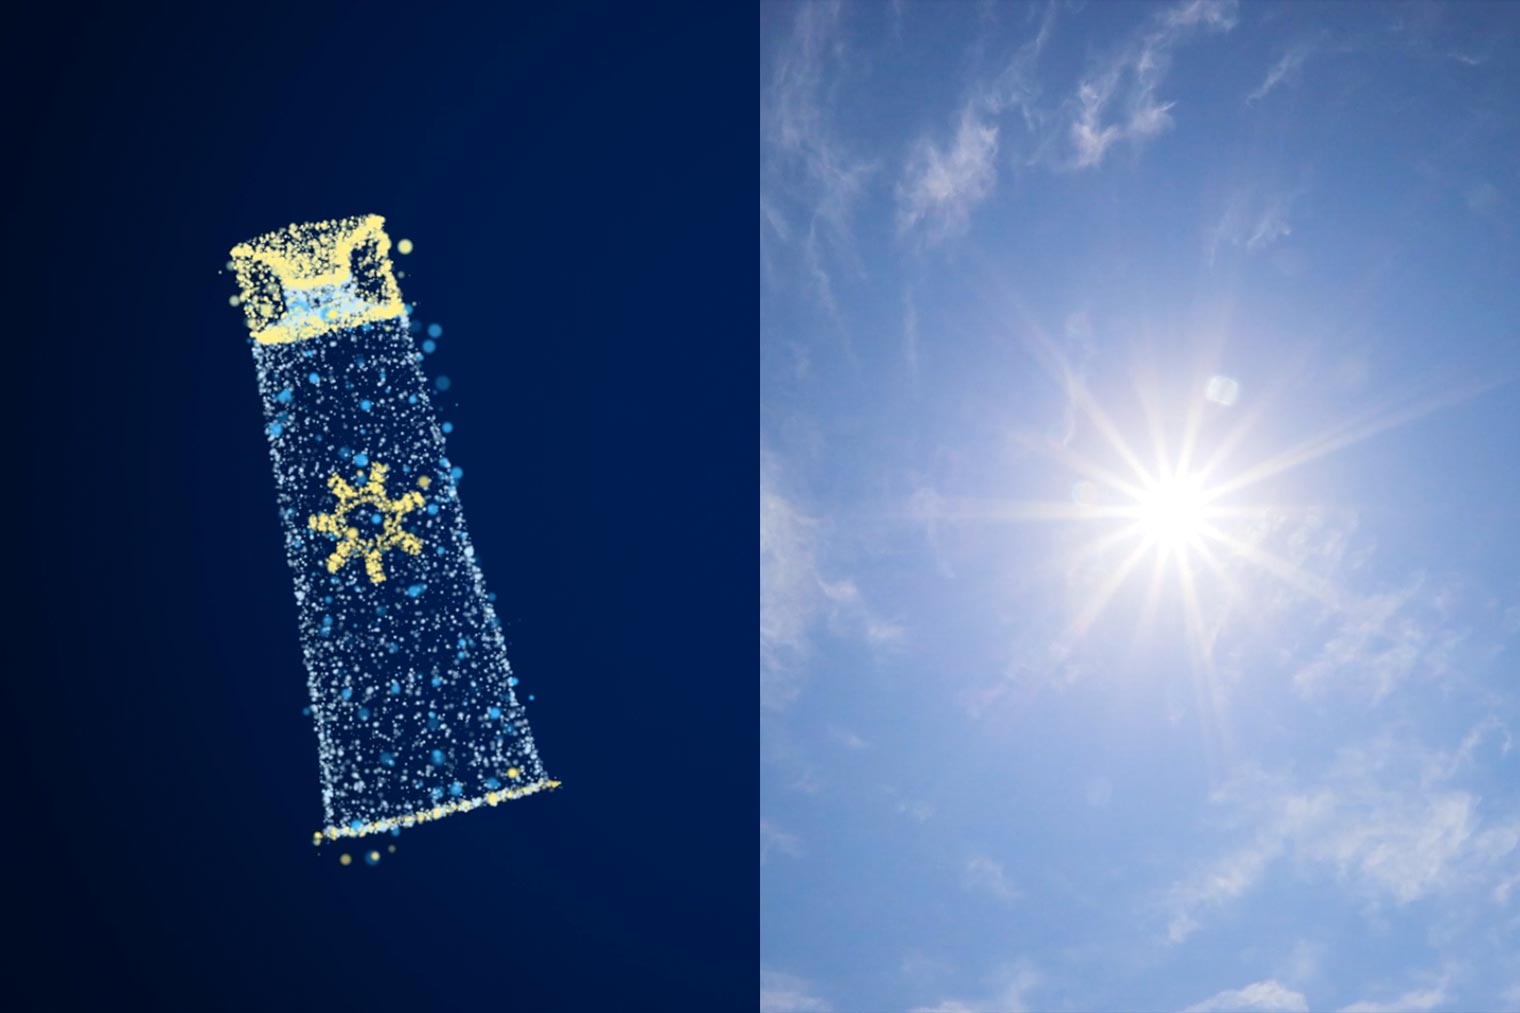 Splitscreen of sunscreen tube graphic made out of data dots on the left and a sunbeam on the right.